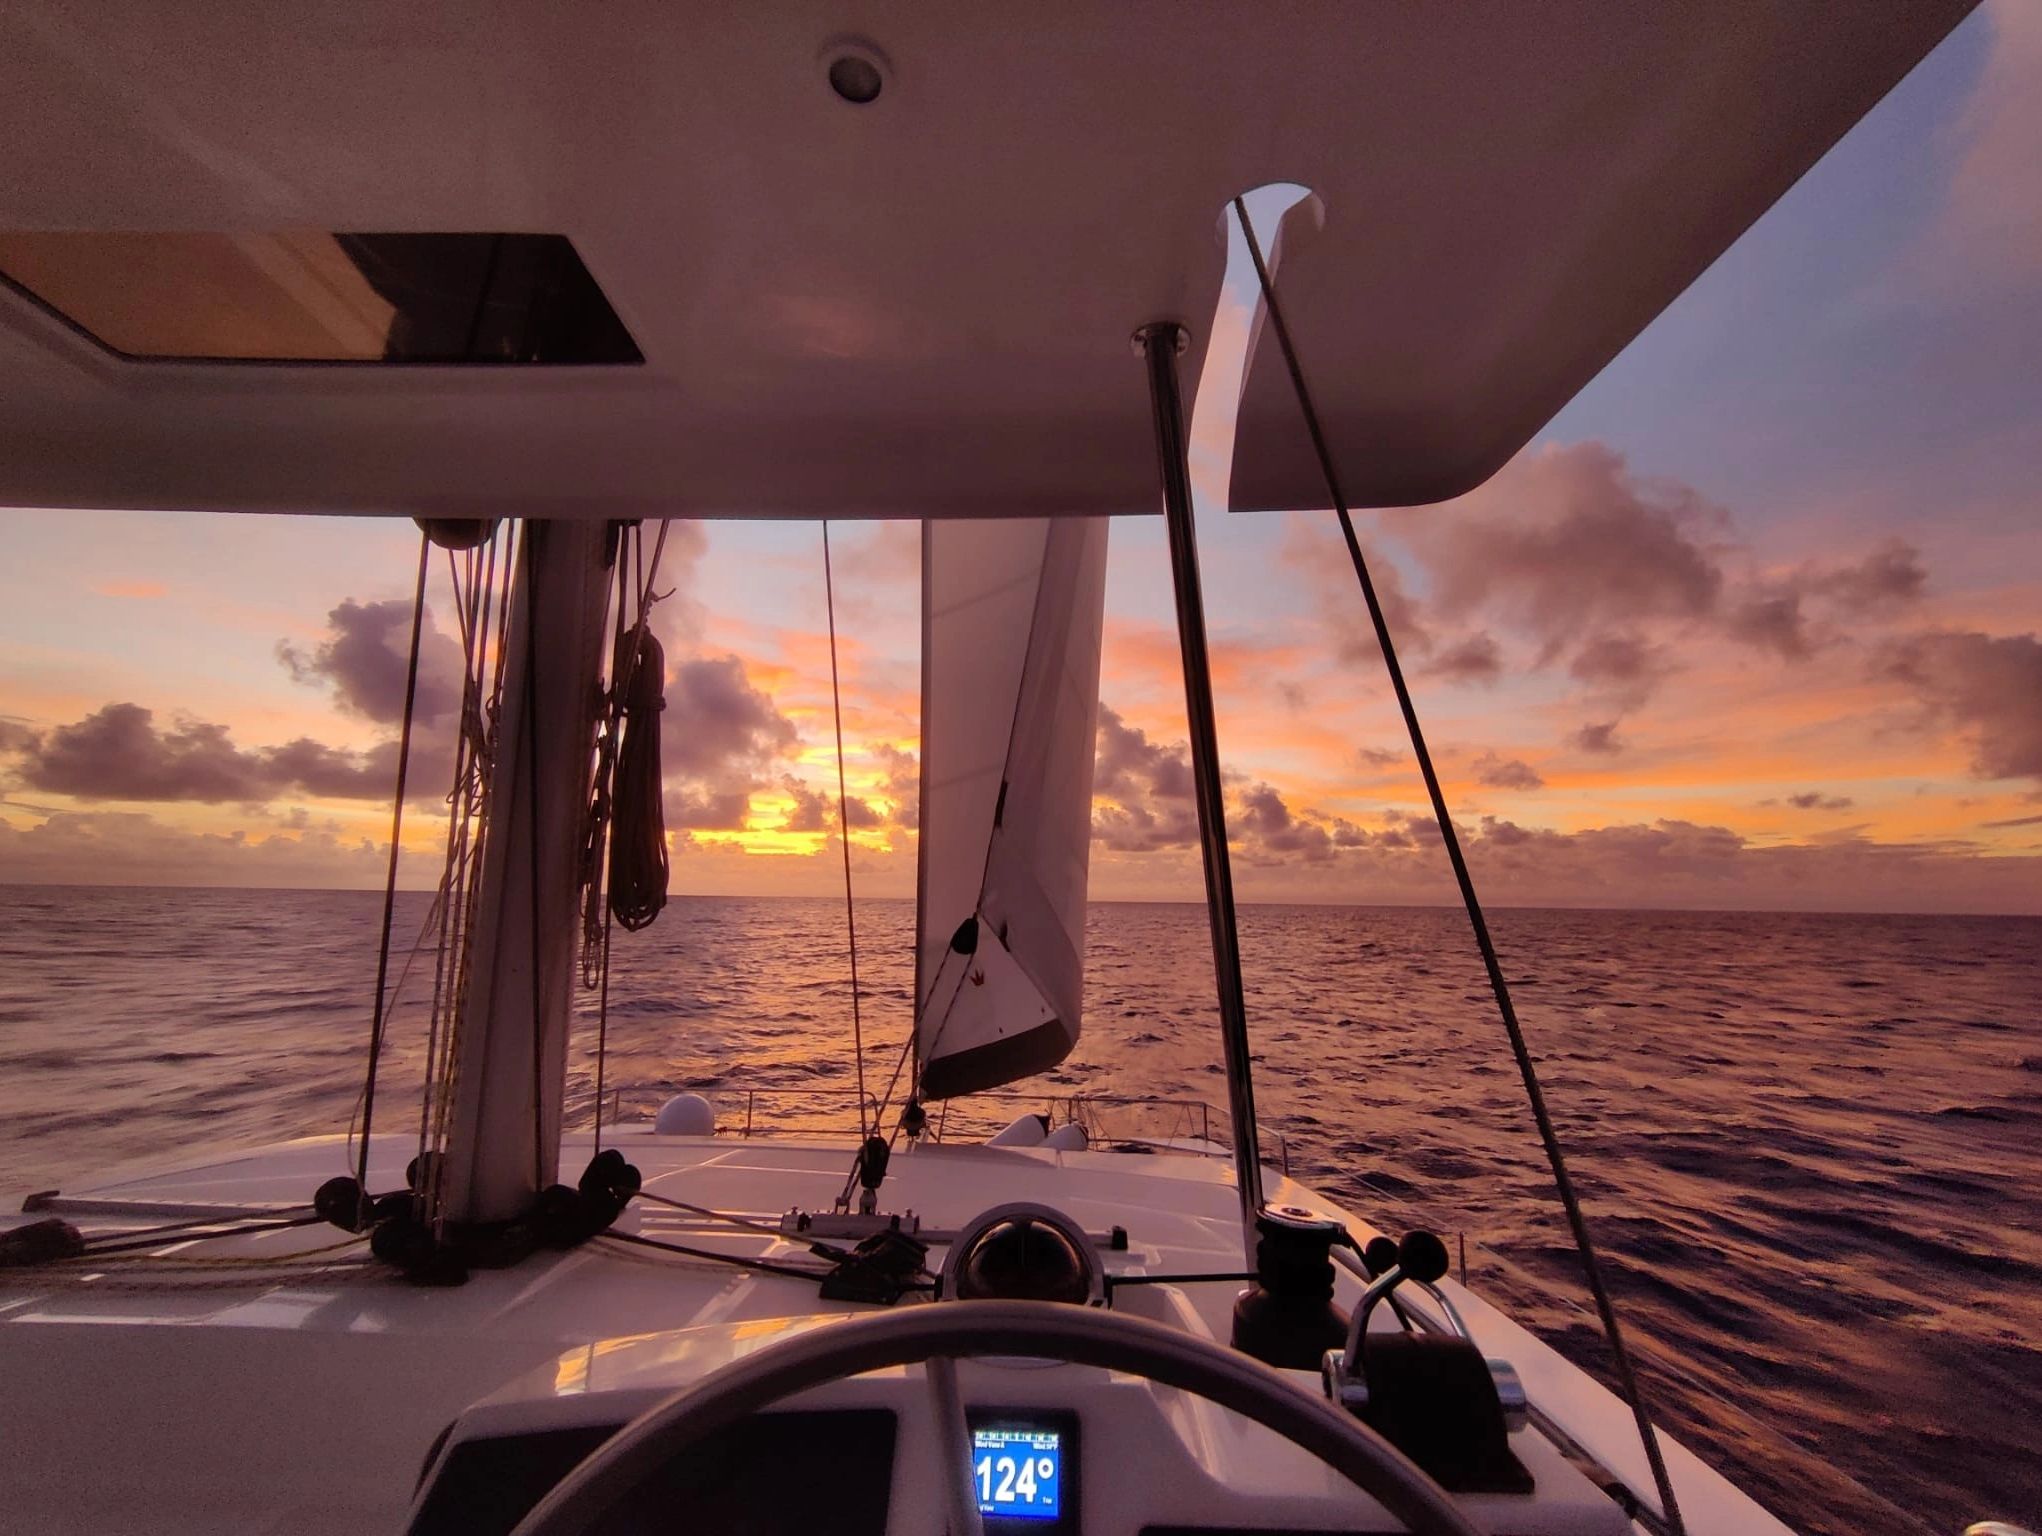 Serenity on a sunset sail.